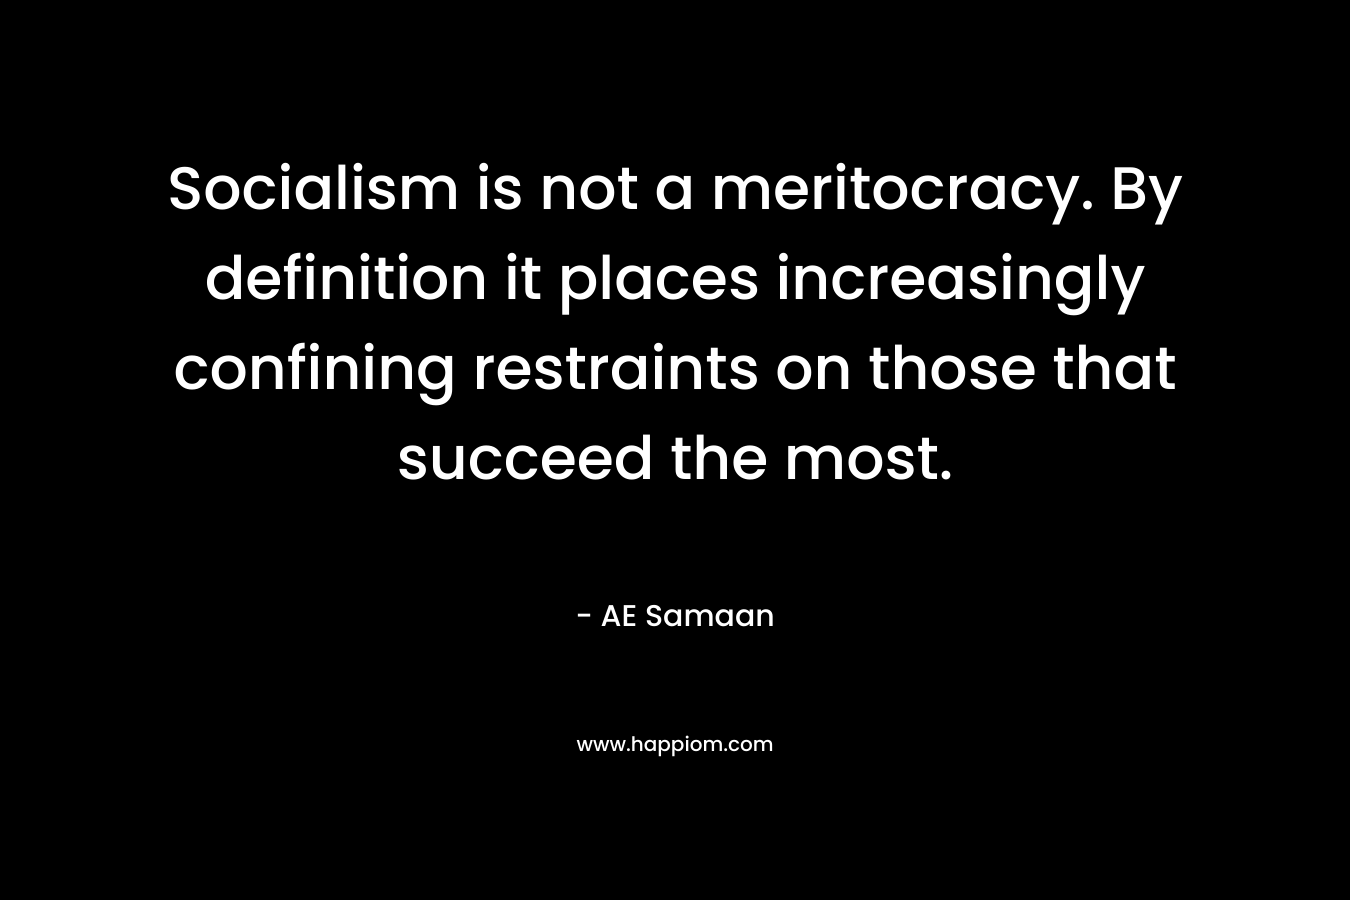 Socialism is not a meritocracy. By definition it places increasingly confining restraints on those that succeed the most.